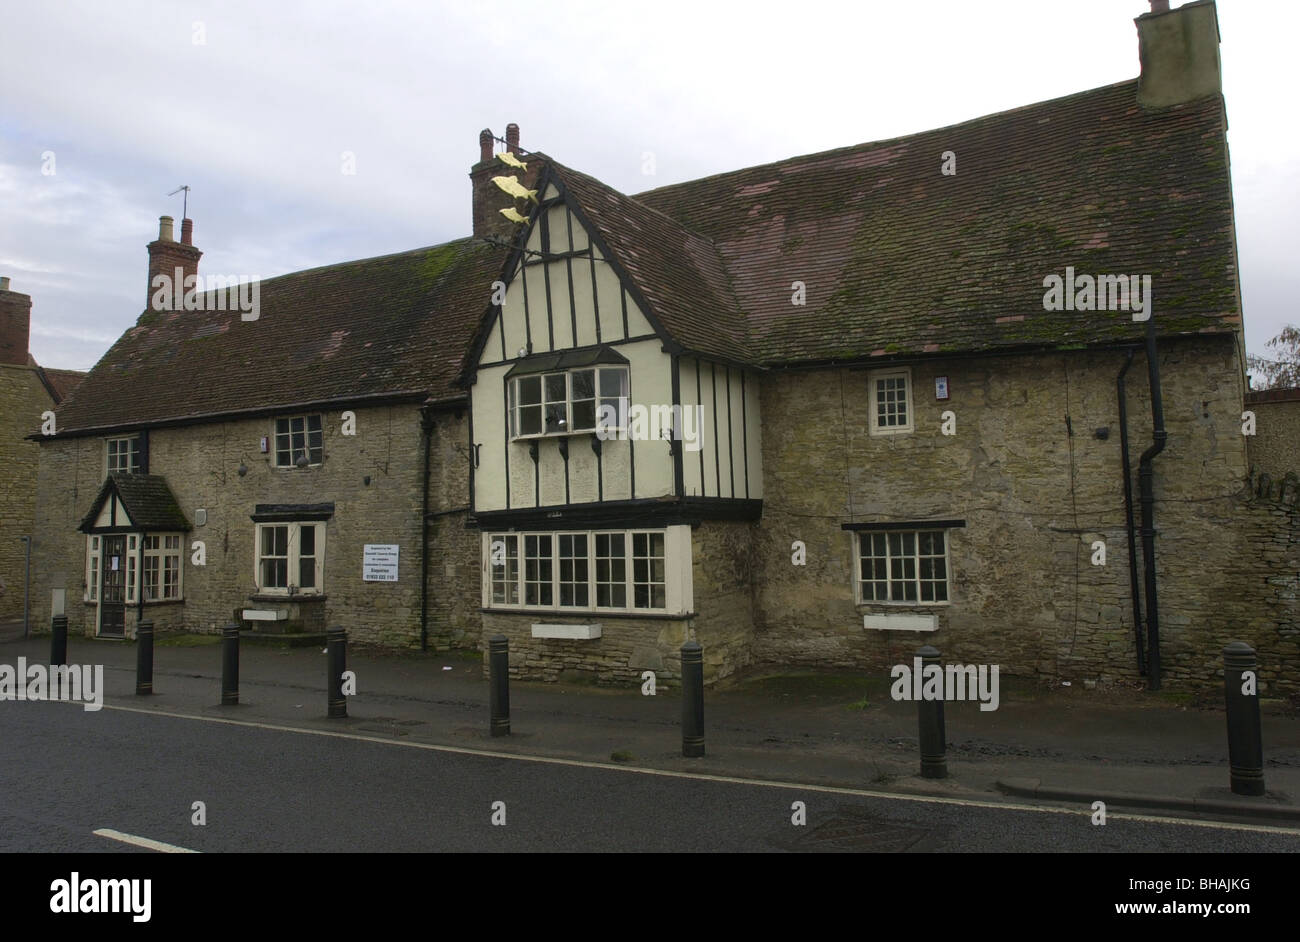 Closed. The 3 Fishes public house in Turvey, Bedfordshire UK Stock Photo